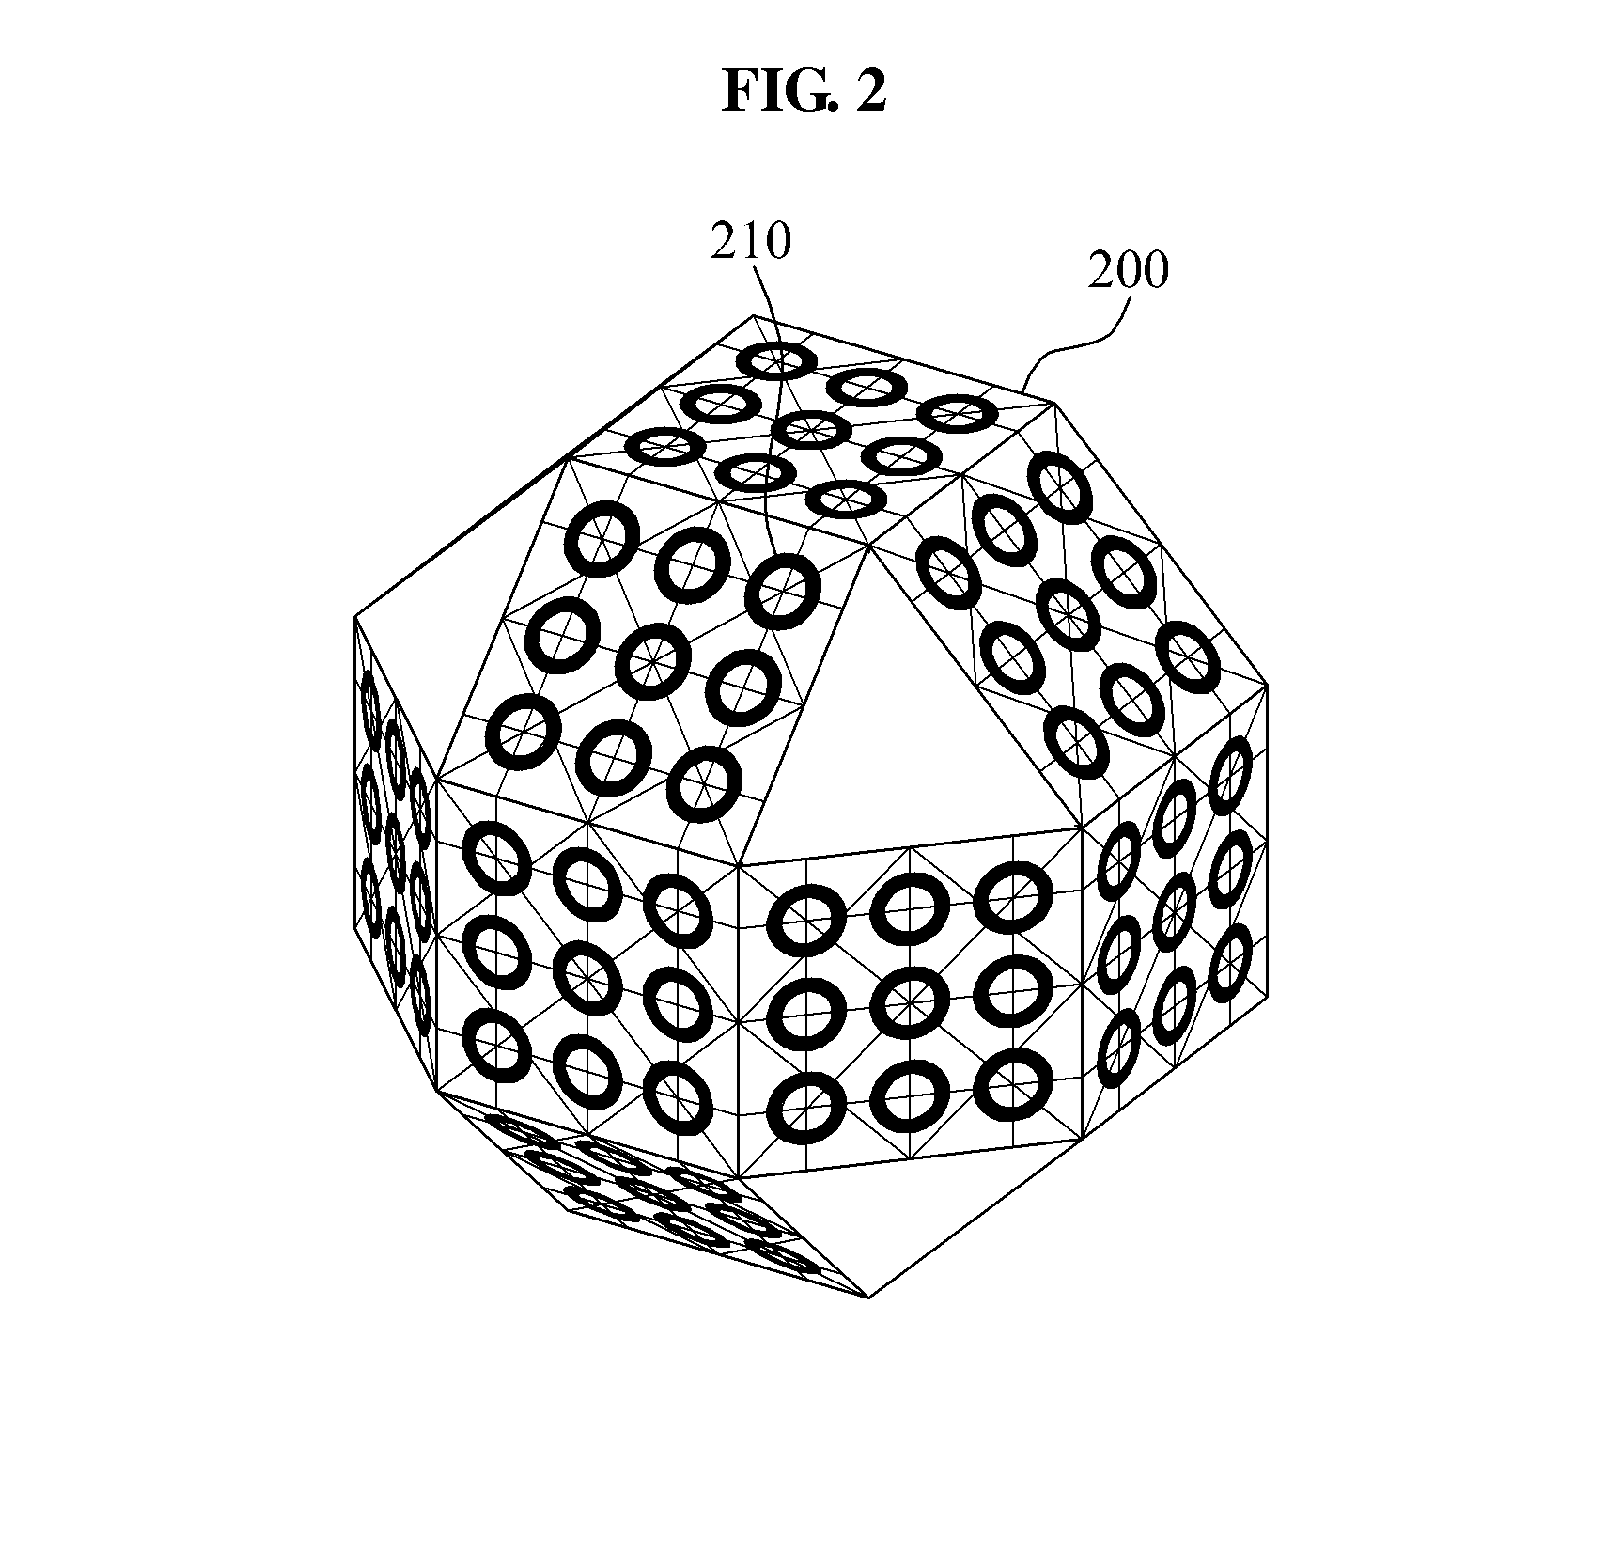 Apparatus and method for calibrating depth image based on relationship between depth sensor and color camera